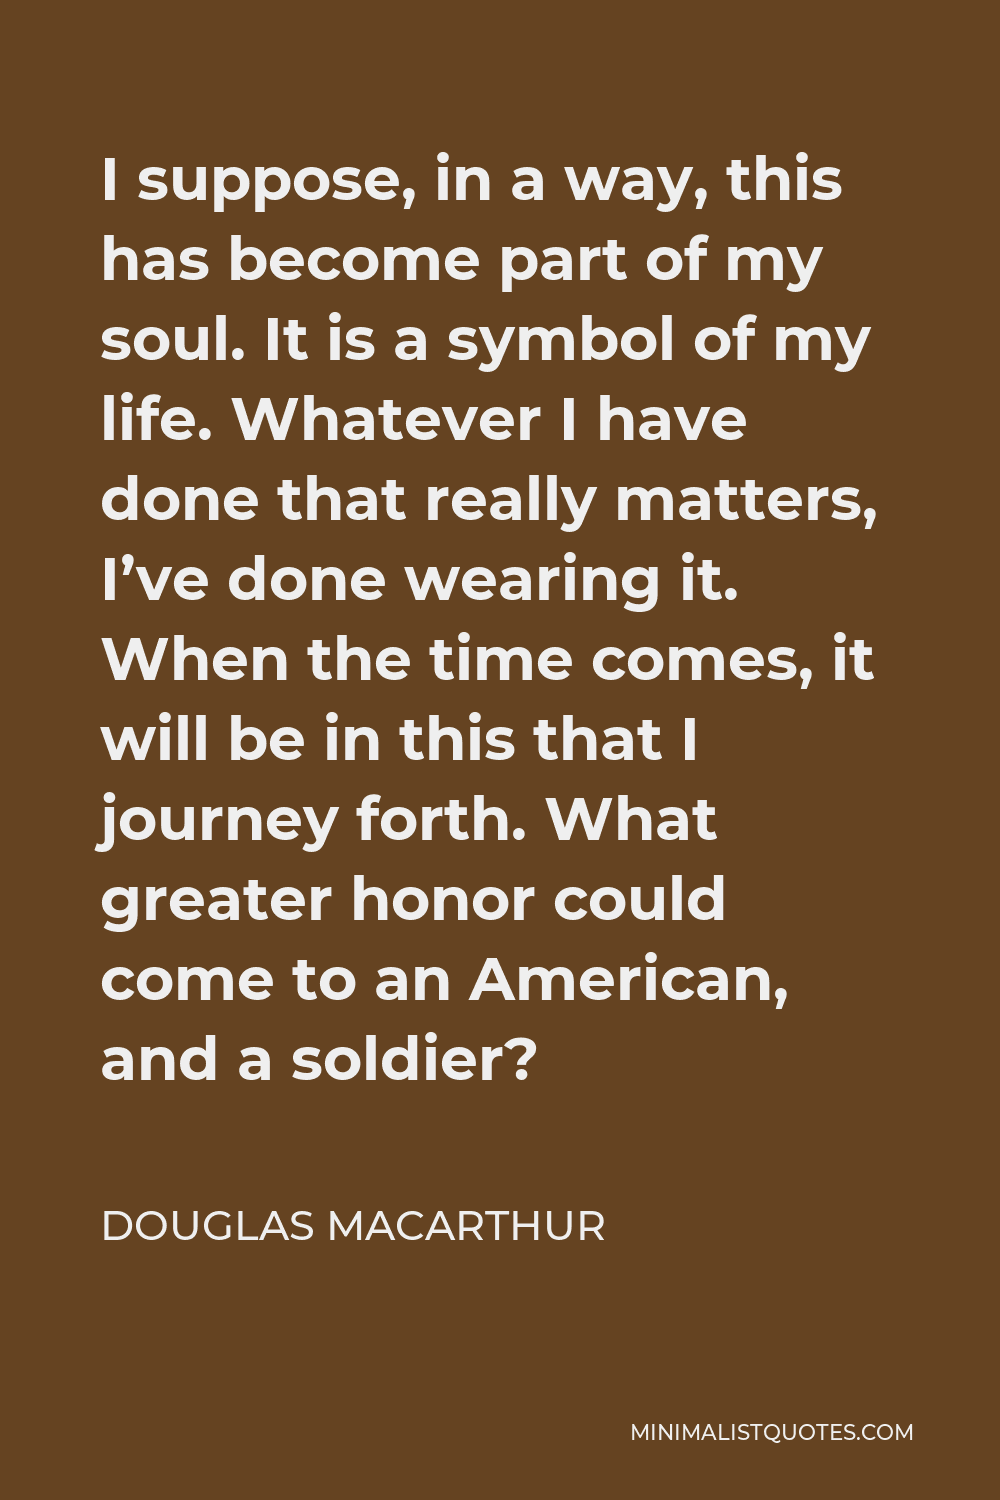 Douglas MacArthur Quote - I suppose, in a way, this has become part of my soul. It is a symbol of my life. Whatever I have done that really matters, I’ve done wearing it. When the time comes, it will be in this that I journey forth. What greater honor could come to an American, and a soldier?